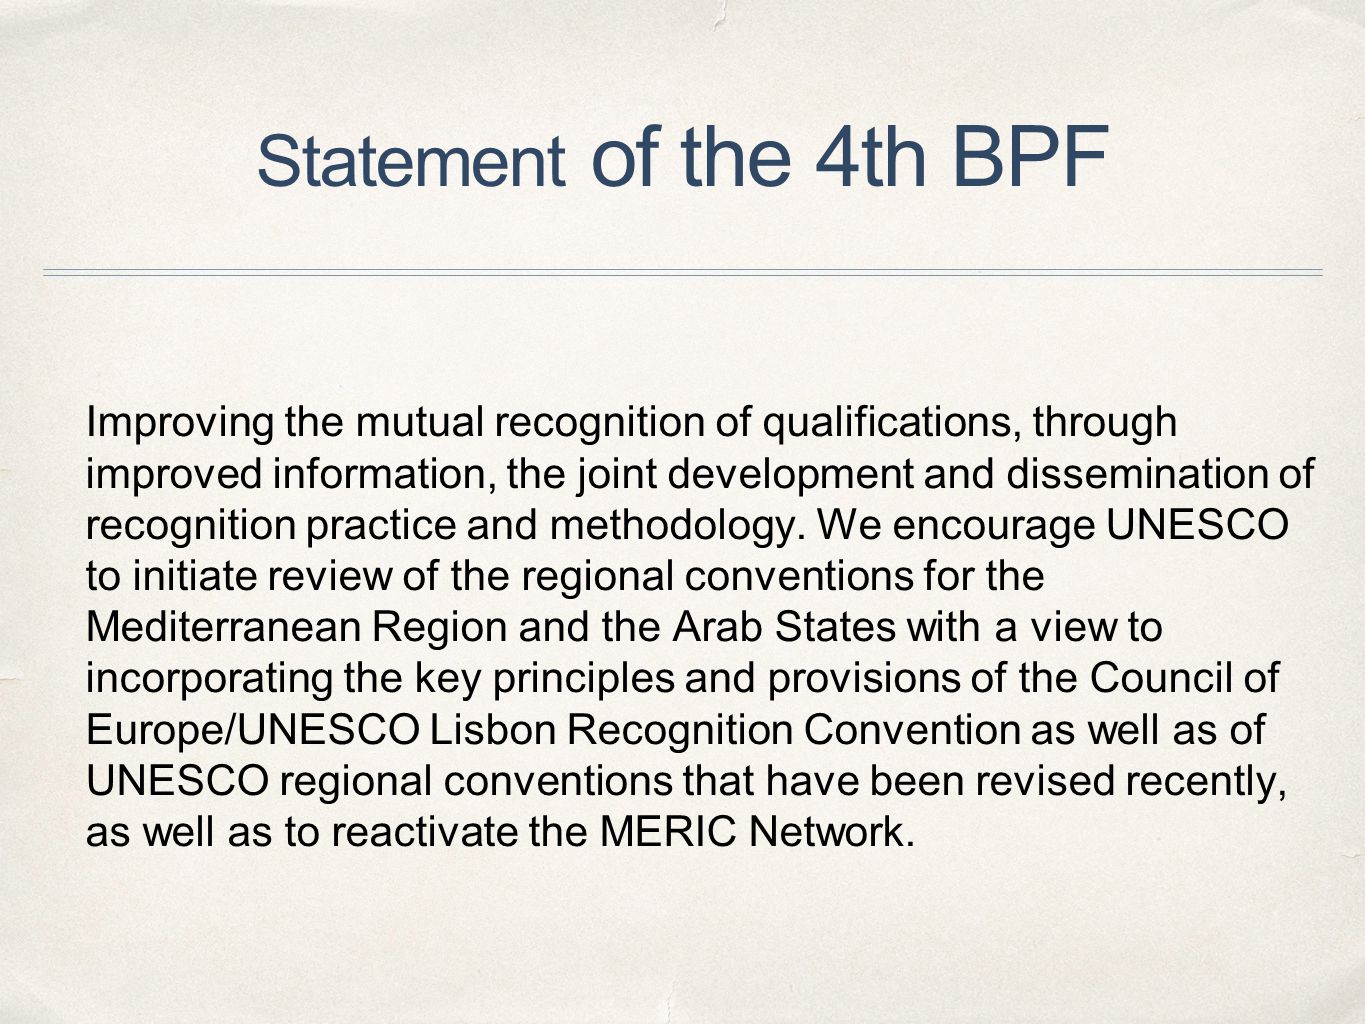 Statement of the 4th BPF Improving the mutual recognition of qualifications, through improved information, the joint development and dissemination of recognition practice and methodology.